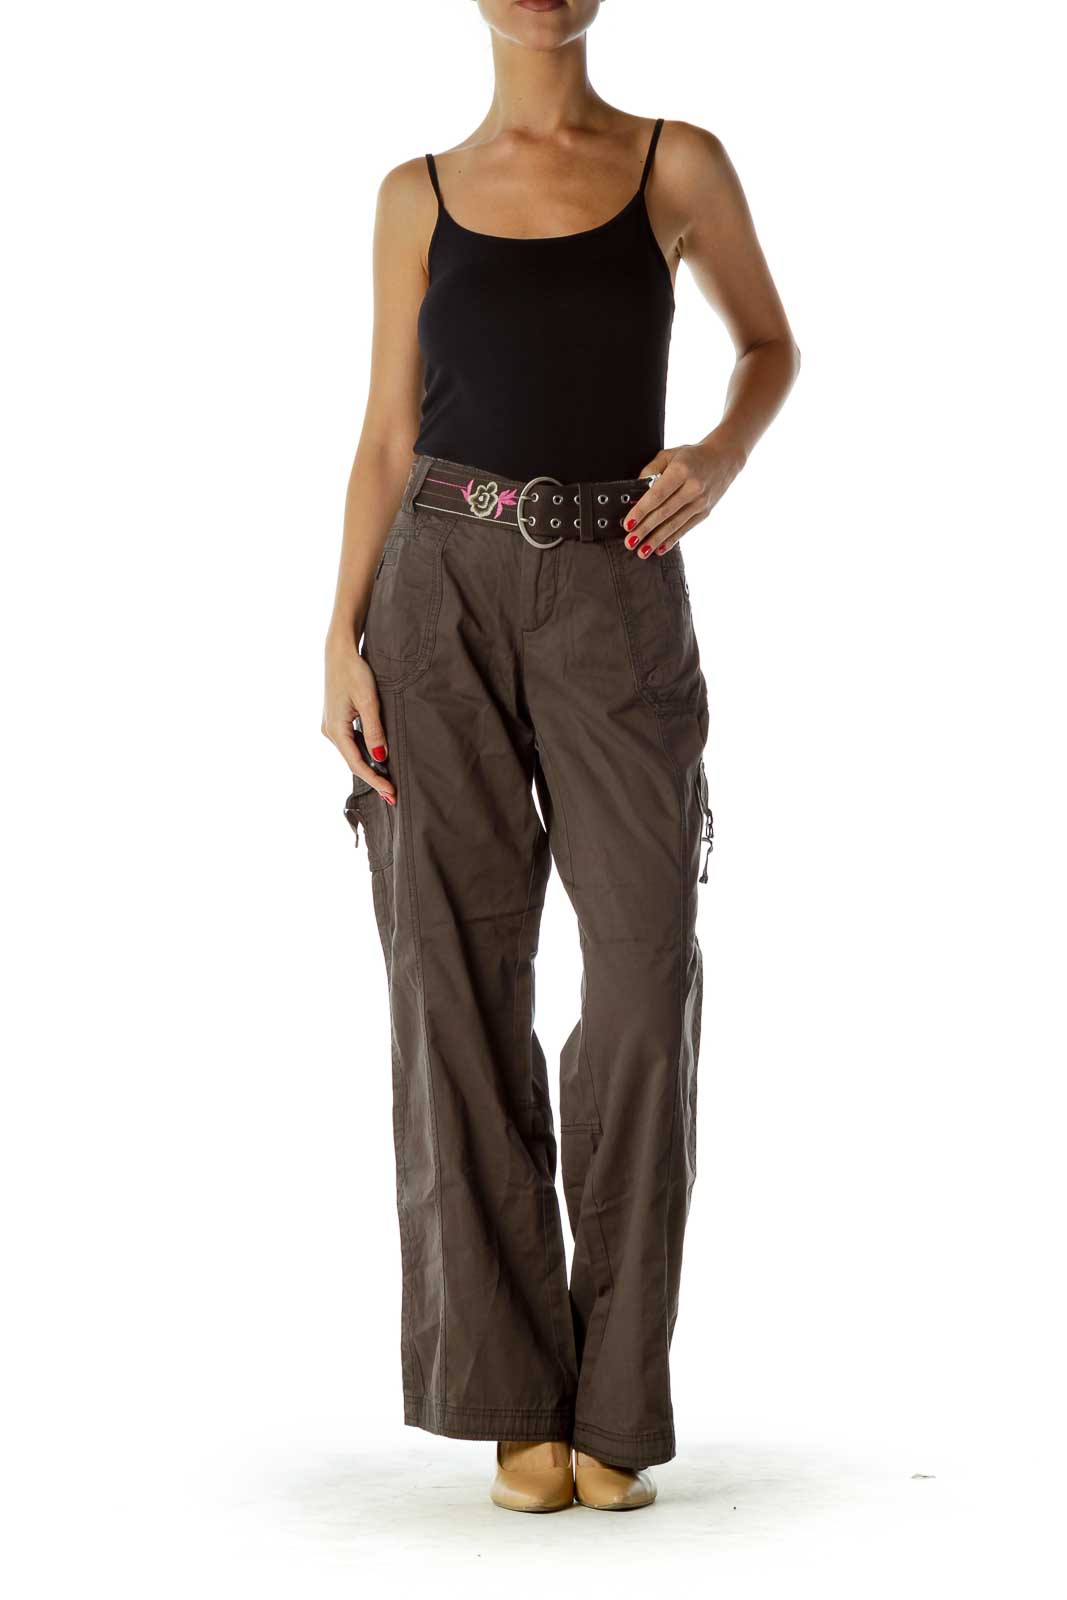 Y2K pink cargo pants Esprit low rise late 90s baggy grunge style wide leg  cargo | eBay